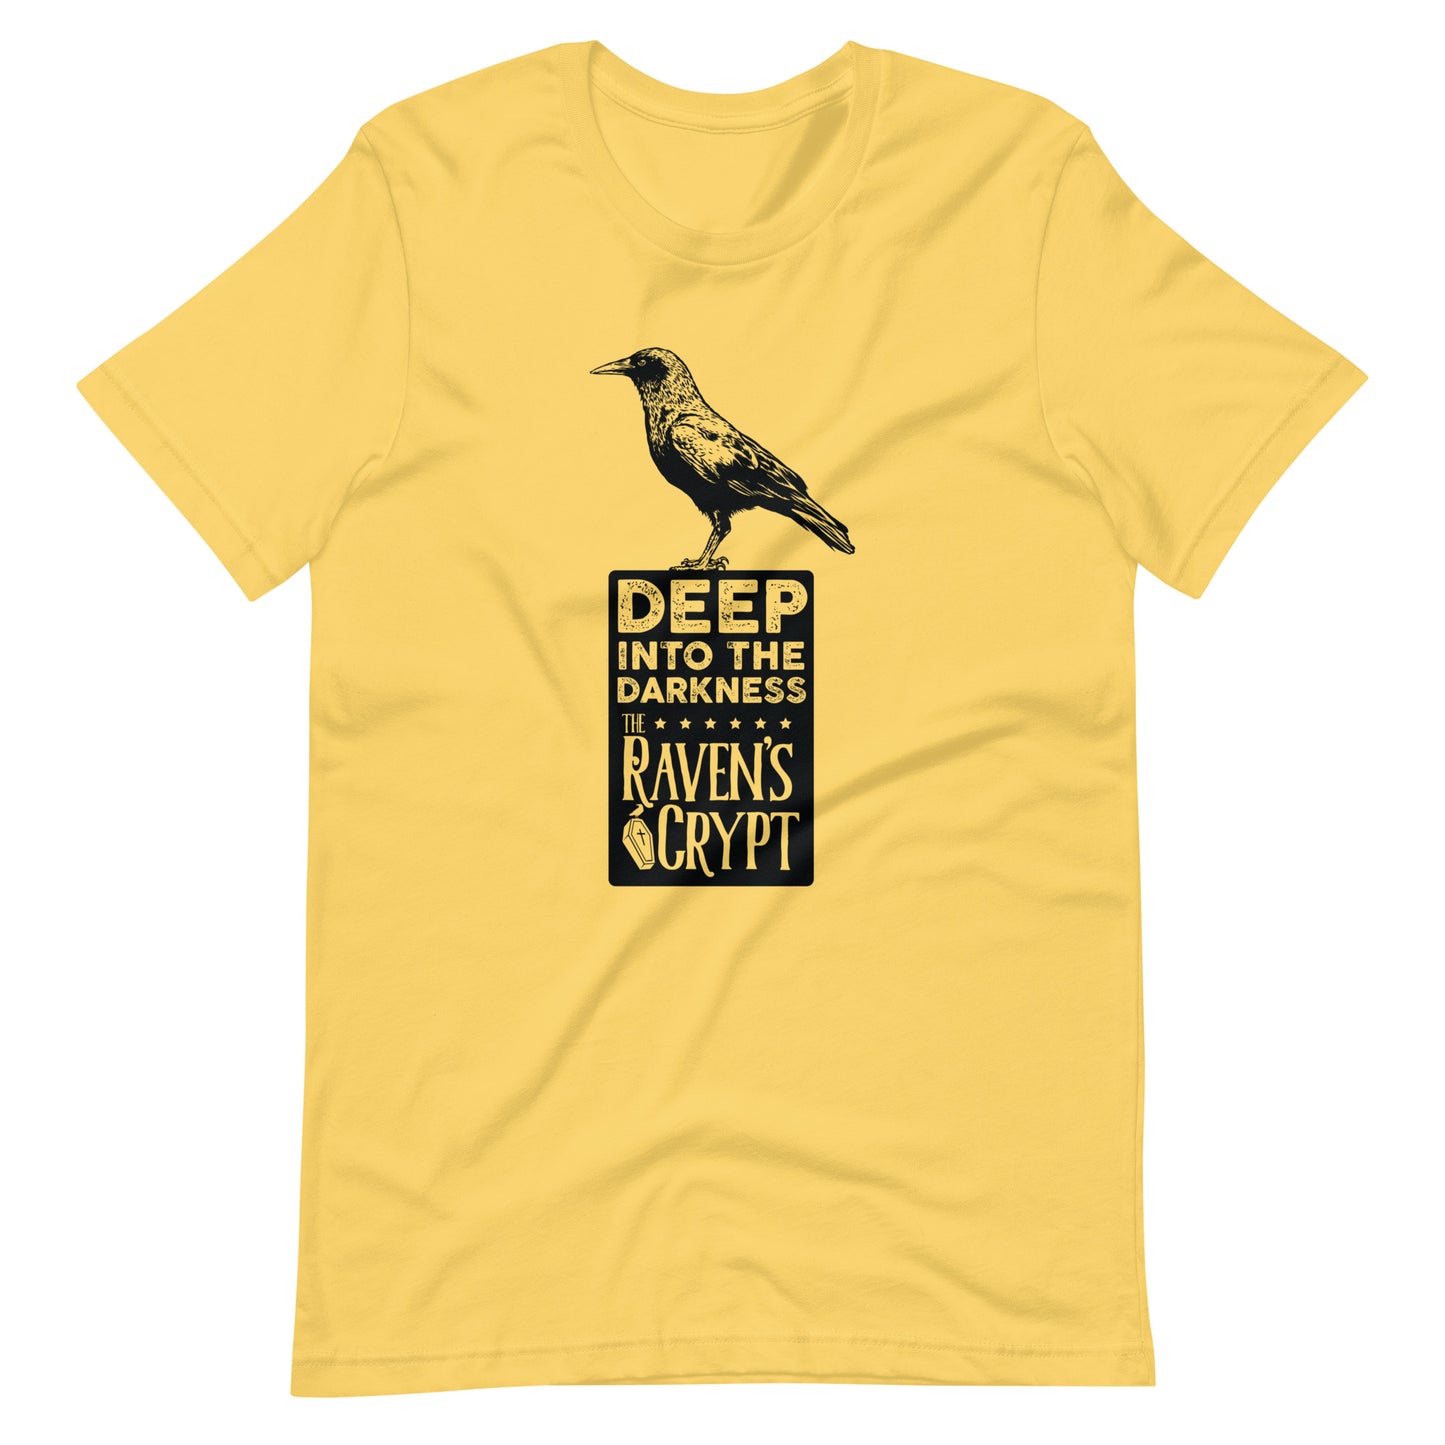 Deep Into the Darkness Crypt 2 - Men's t-shirt - Yellow Front